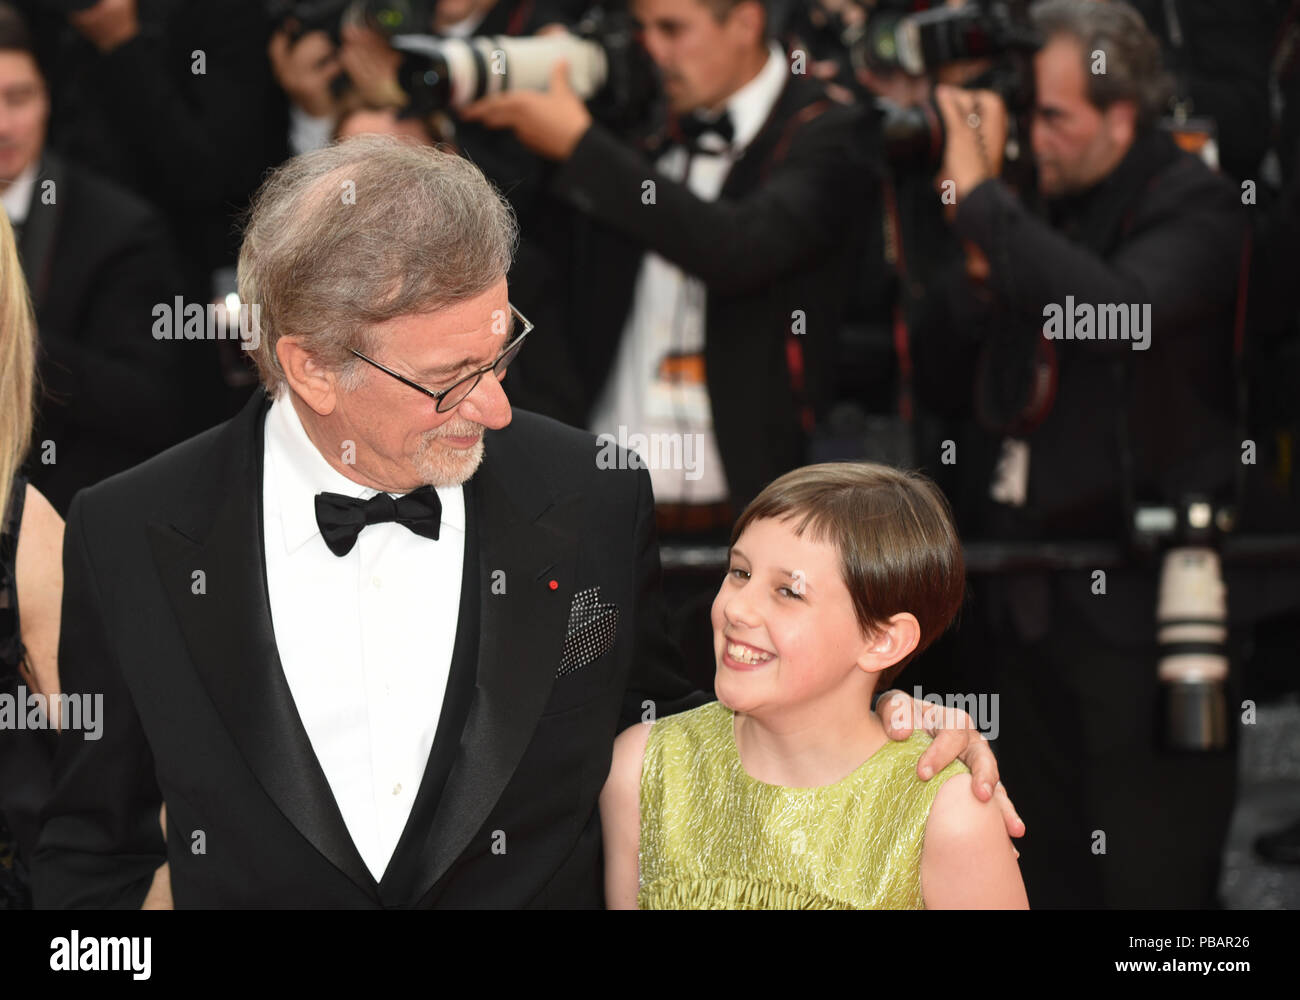 May 14, 2016 - Cannes, France: Steven Spielberg and Ruby Barnhill  attend the 'The BFG' premiere during the 69th Cannes film festival. Steven Spielberg lors du 69eme Festival de Cannes. *** FRANCE OUT / NO SALES TO FRENCH MEDIA *** Stock Photo